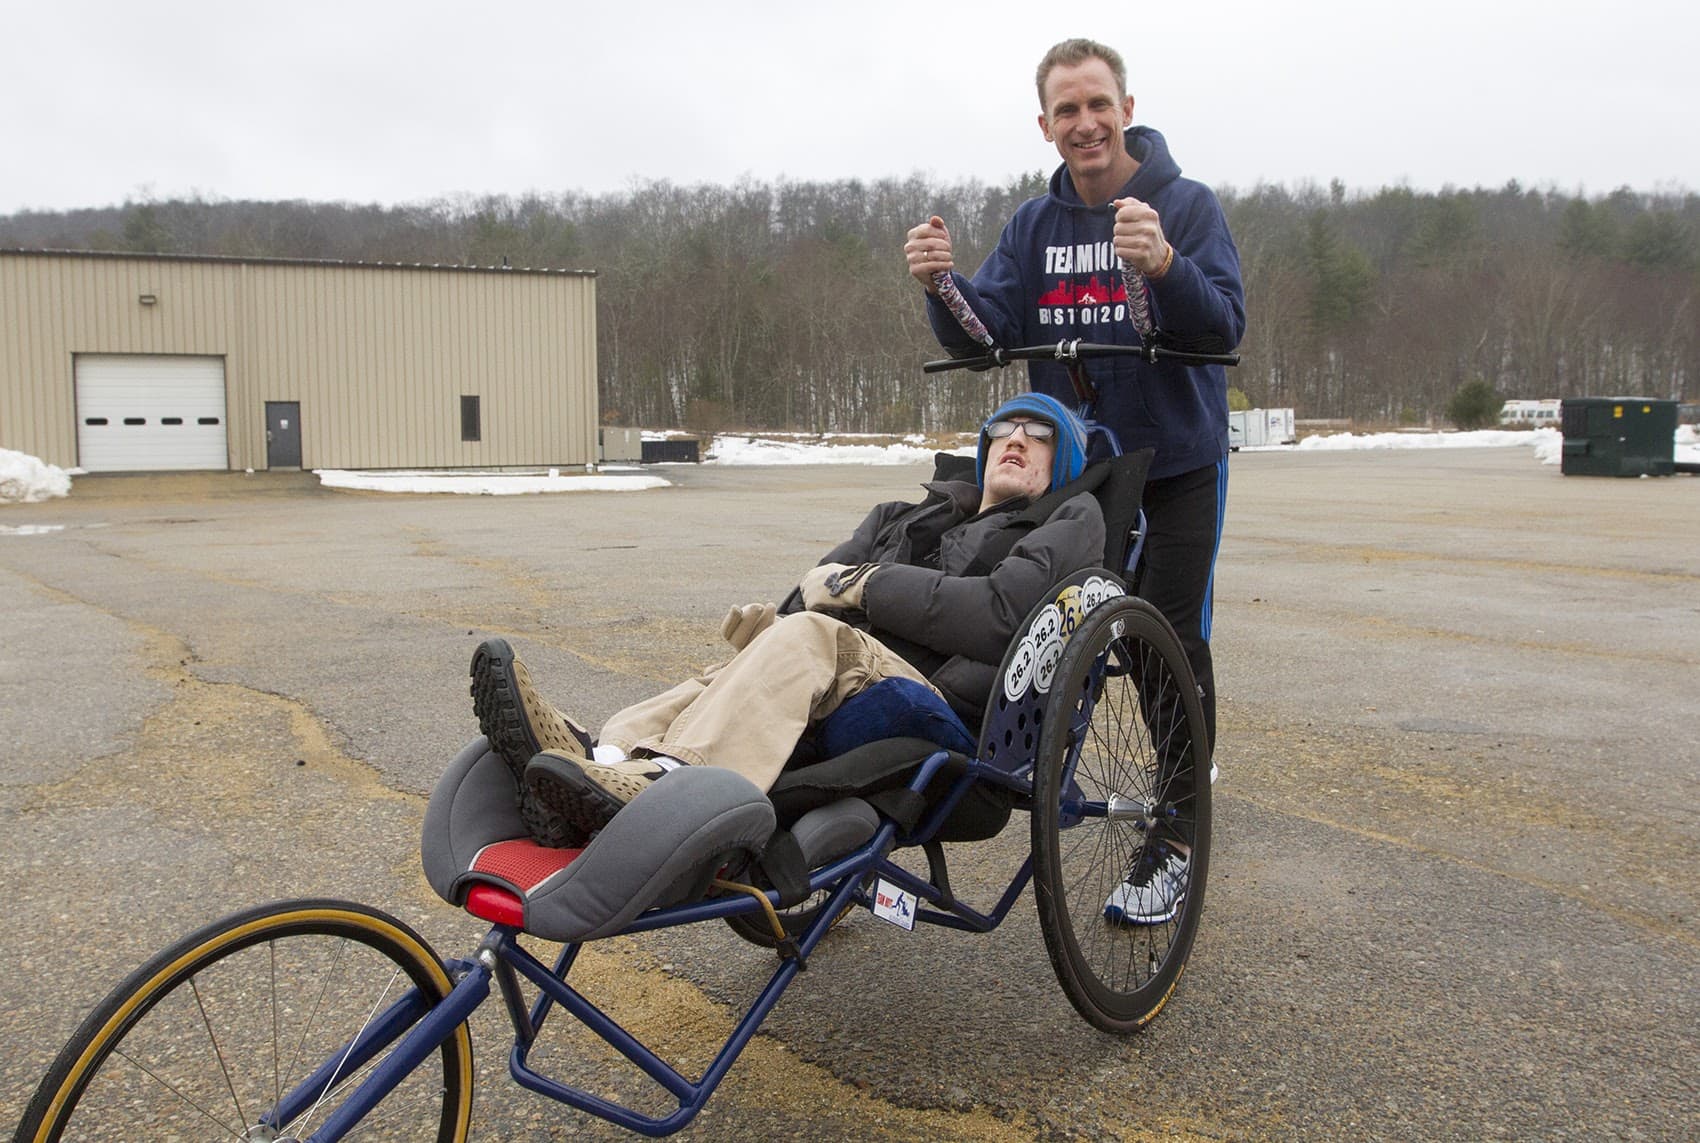 Ted Painter, right, races with Nick Draper using a Team Hoyt Running Chair built by Southbridge Tool and Manufacturing in Dudley. (Joe Difazio for WBUR)